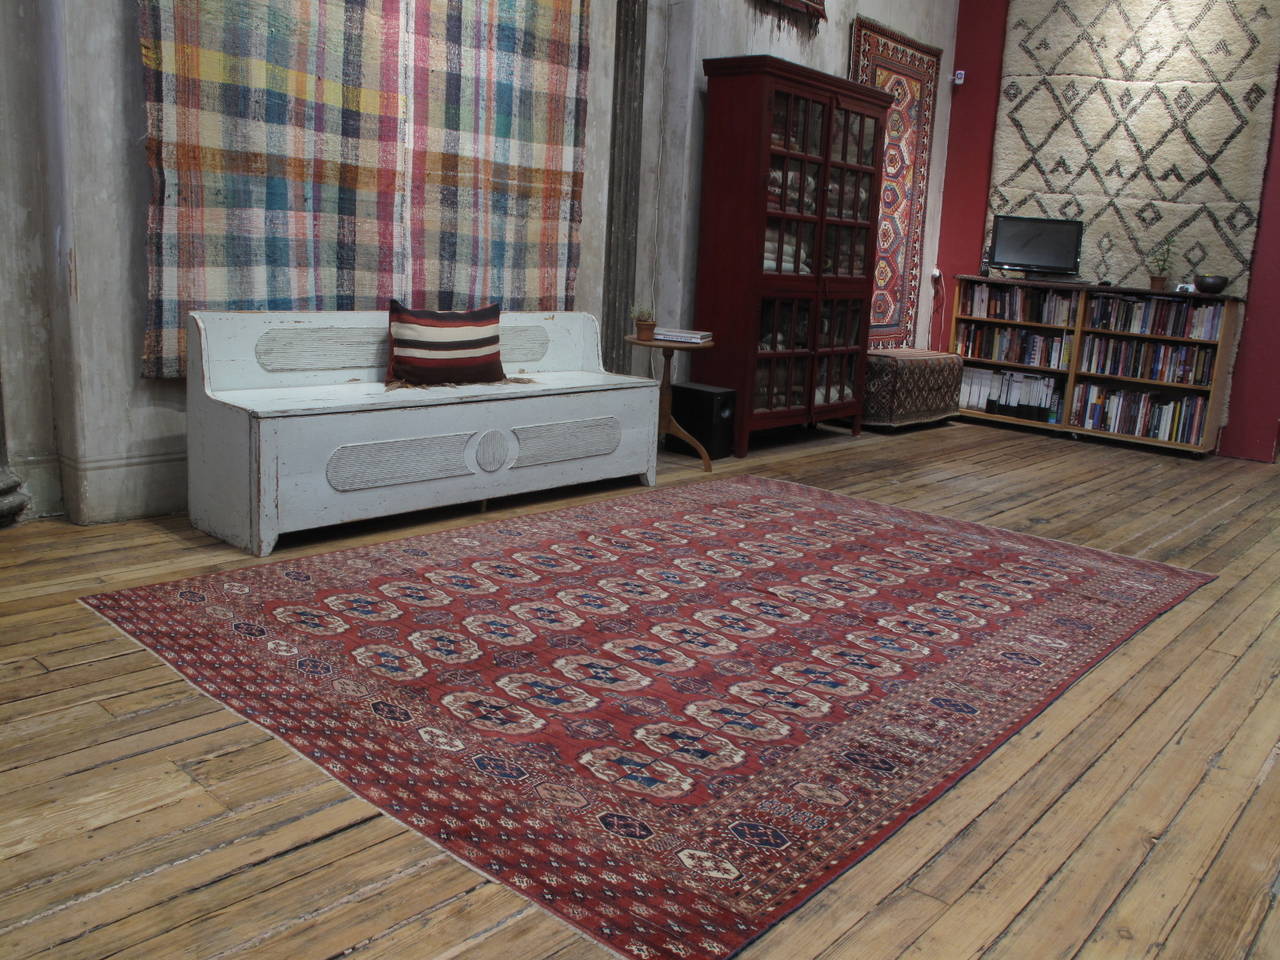 Antique Tekke Main carpet or rug. A handsome antique tribal carpet, woven by the Tekke Turkmen tribal groups in Central Asia. Featuring one of the most iconic designs, this type was often referred to as a 